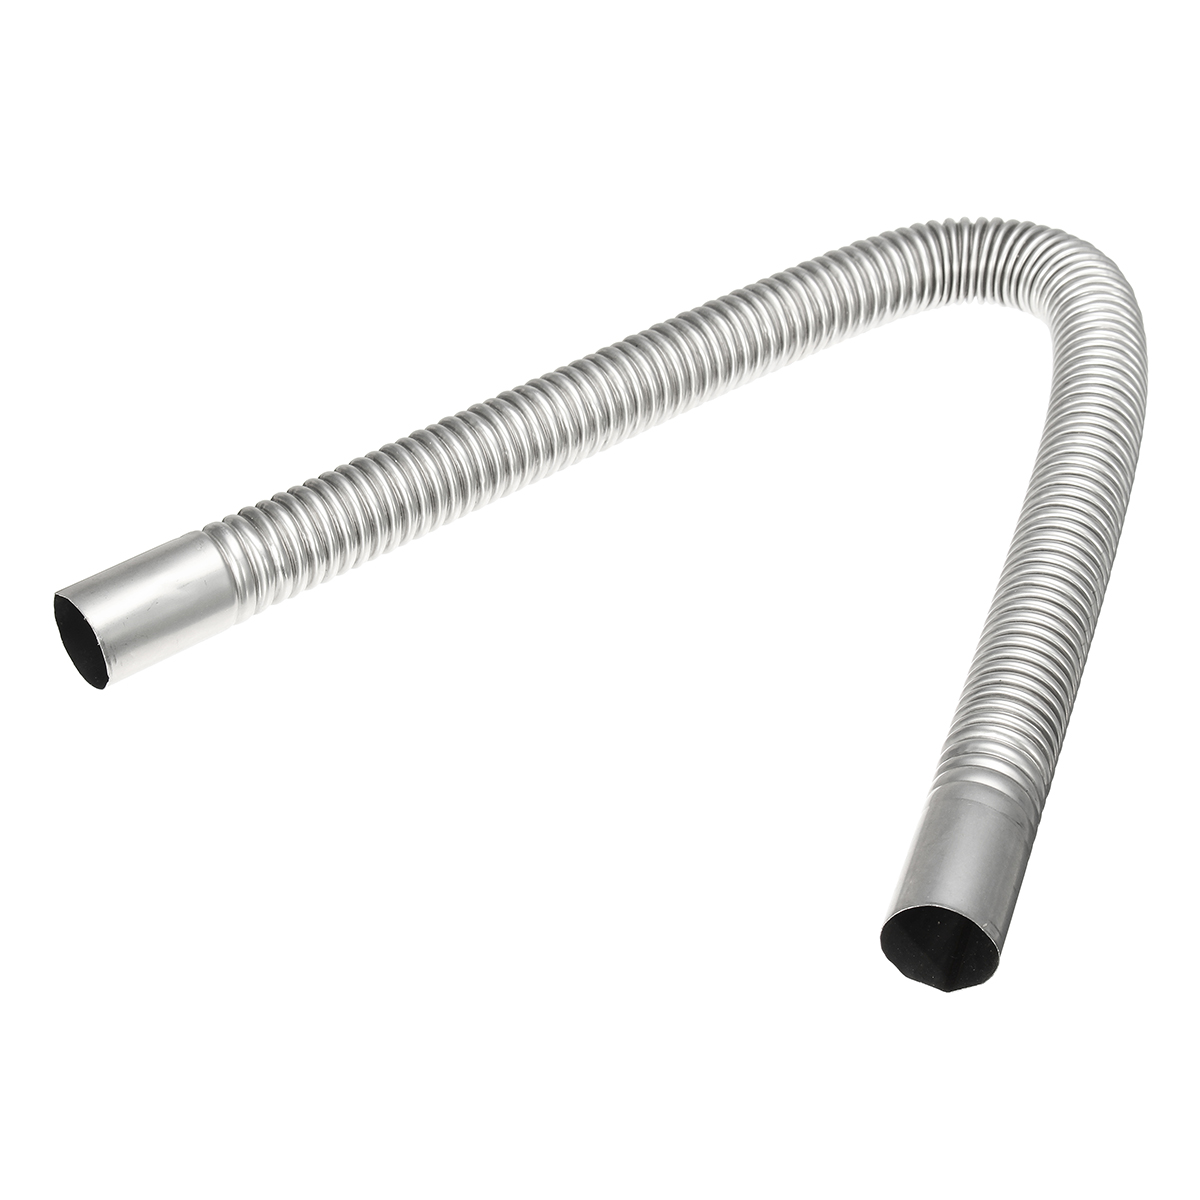 24mm-Exhaust-Silencer--25mm-Filter-Exhaust-and-Intake-Pipe-for-Air-Diesel-Heater-Accessories-1396670-9